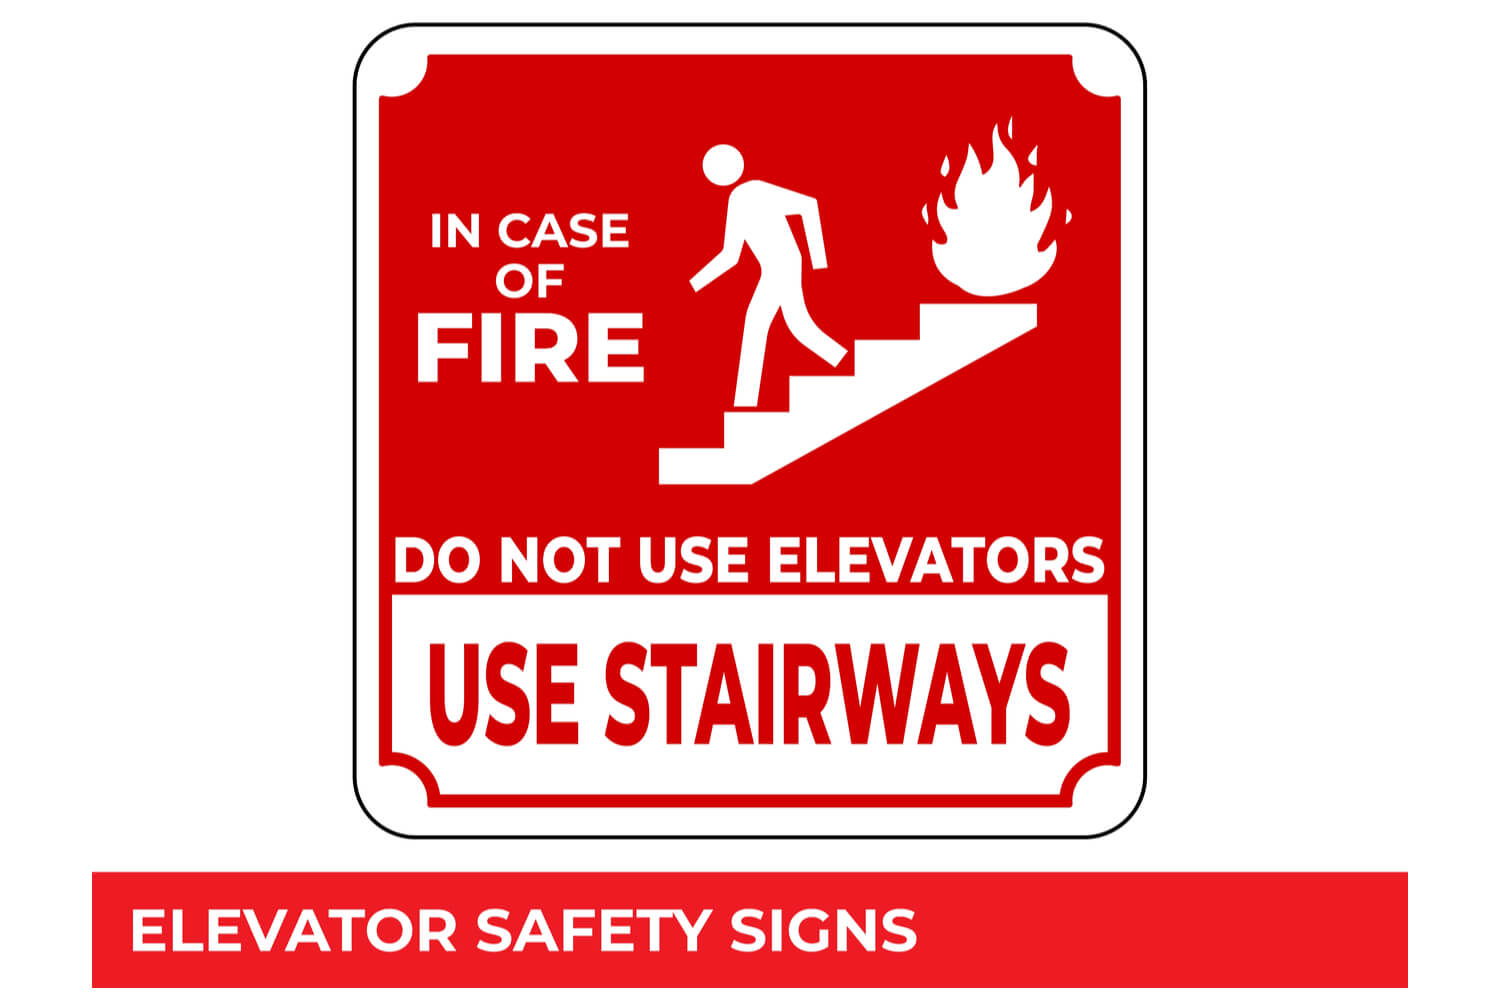 Avoid Using Elevators During Fire